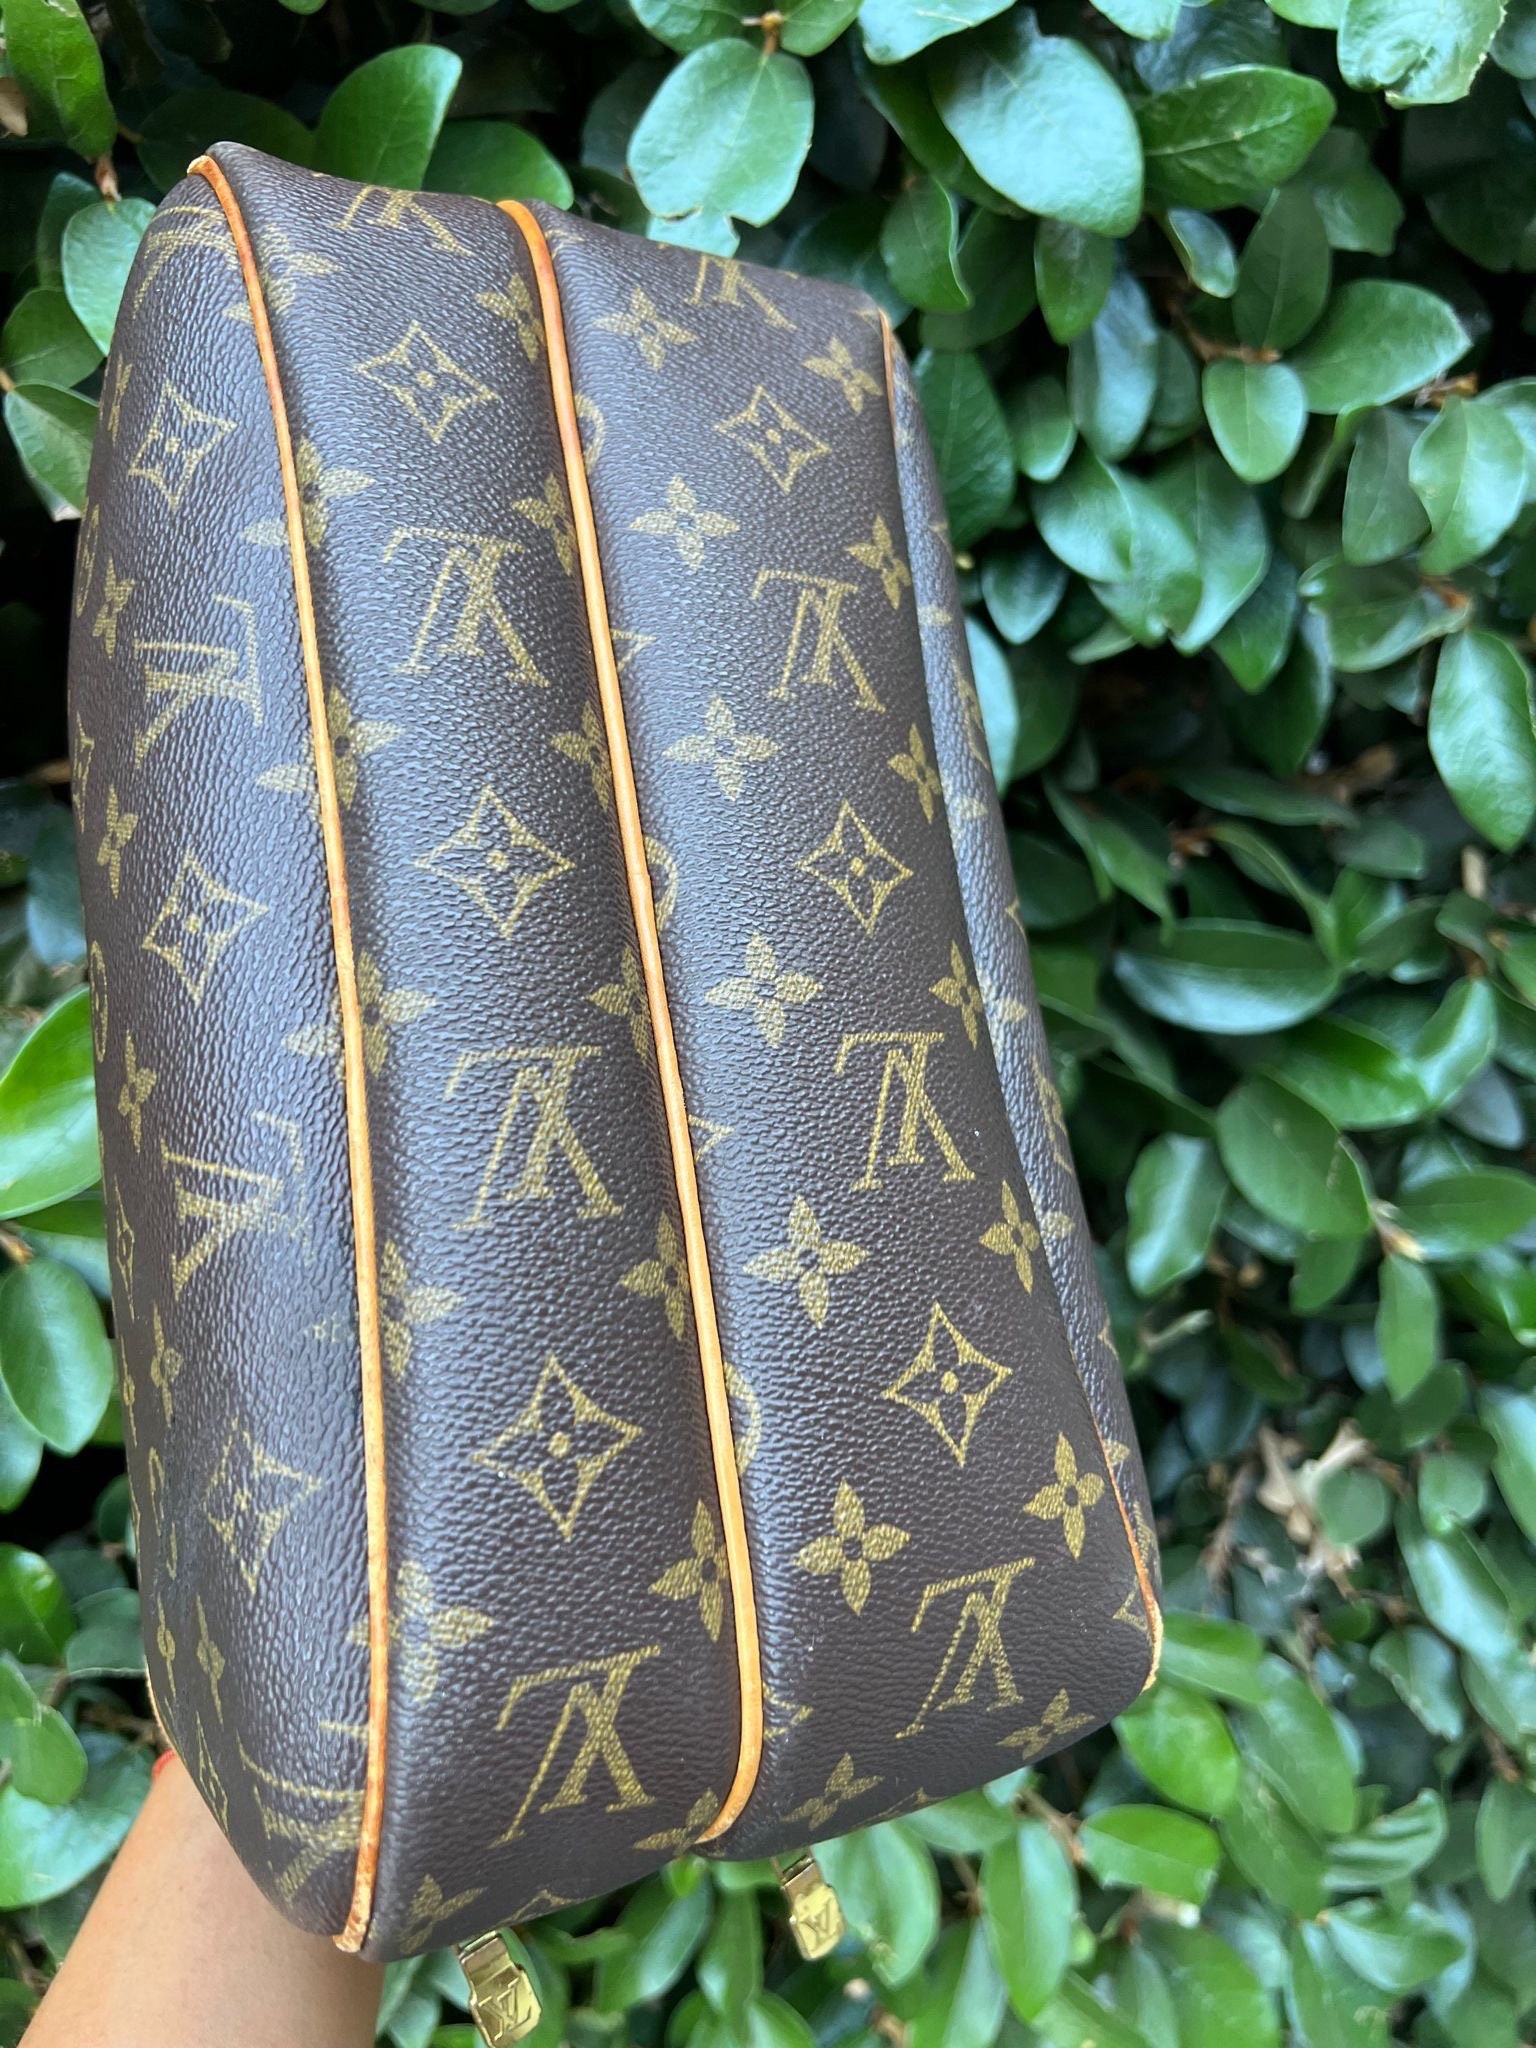 Louis Vuitton 2003 pre-owned Reporter PM crossbody bag - ShopStyle